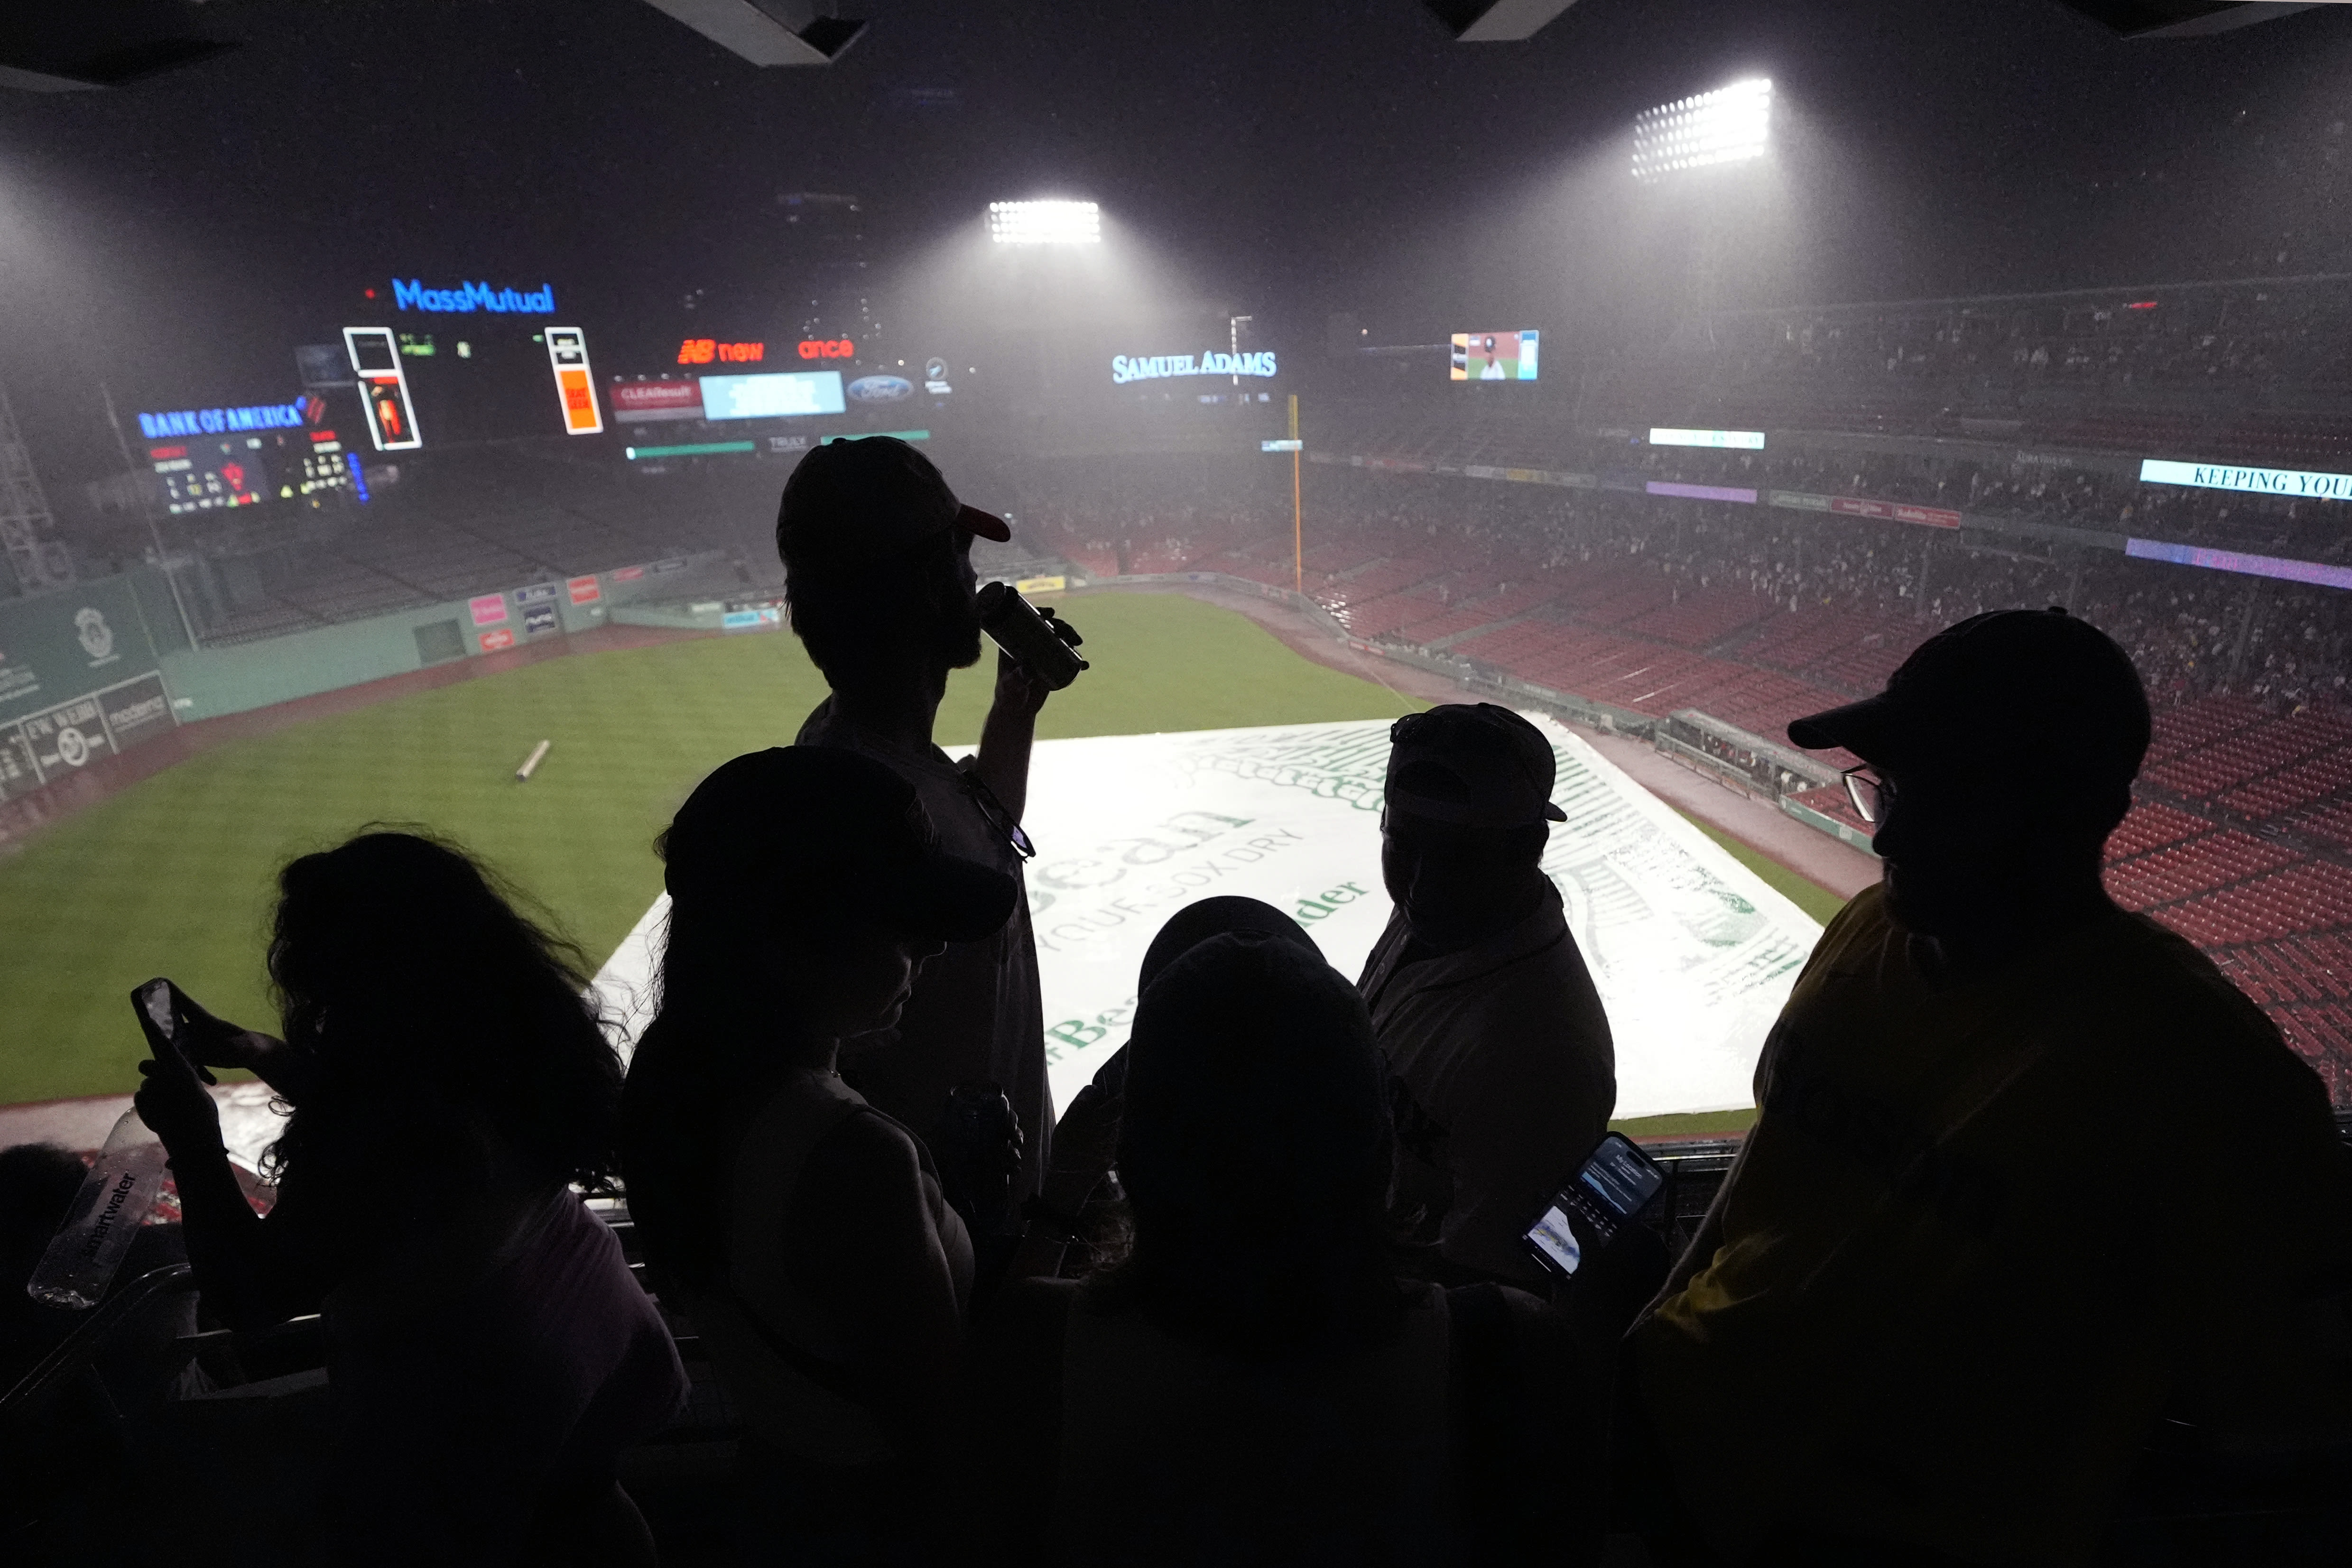 Blue Jays-Red Sox series finale postponed due to weather, will be part of split DH in August